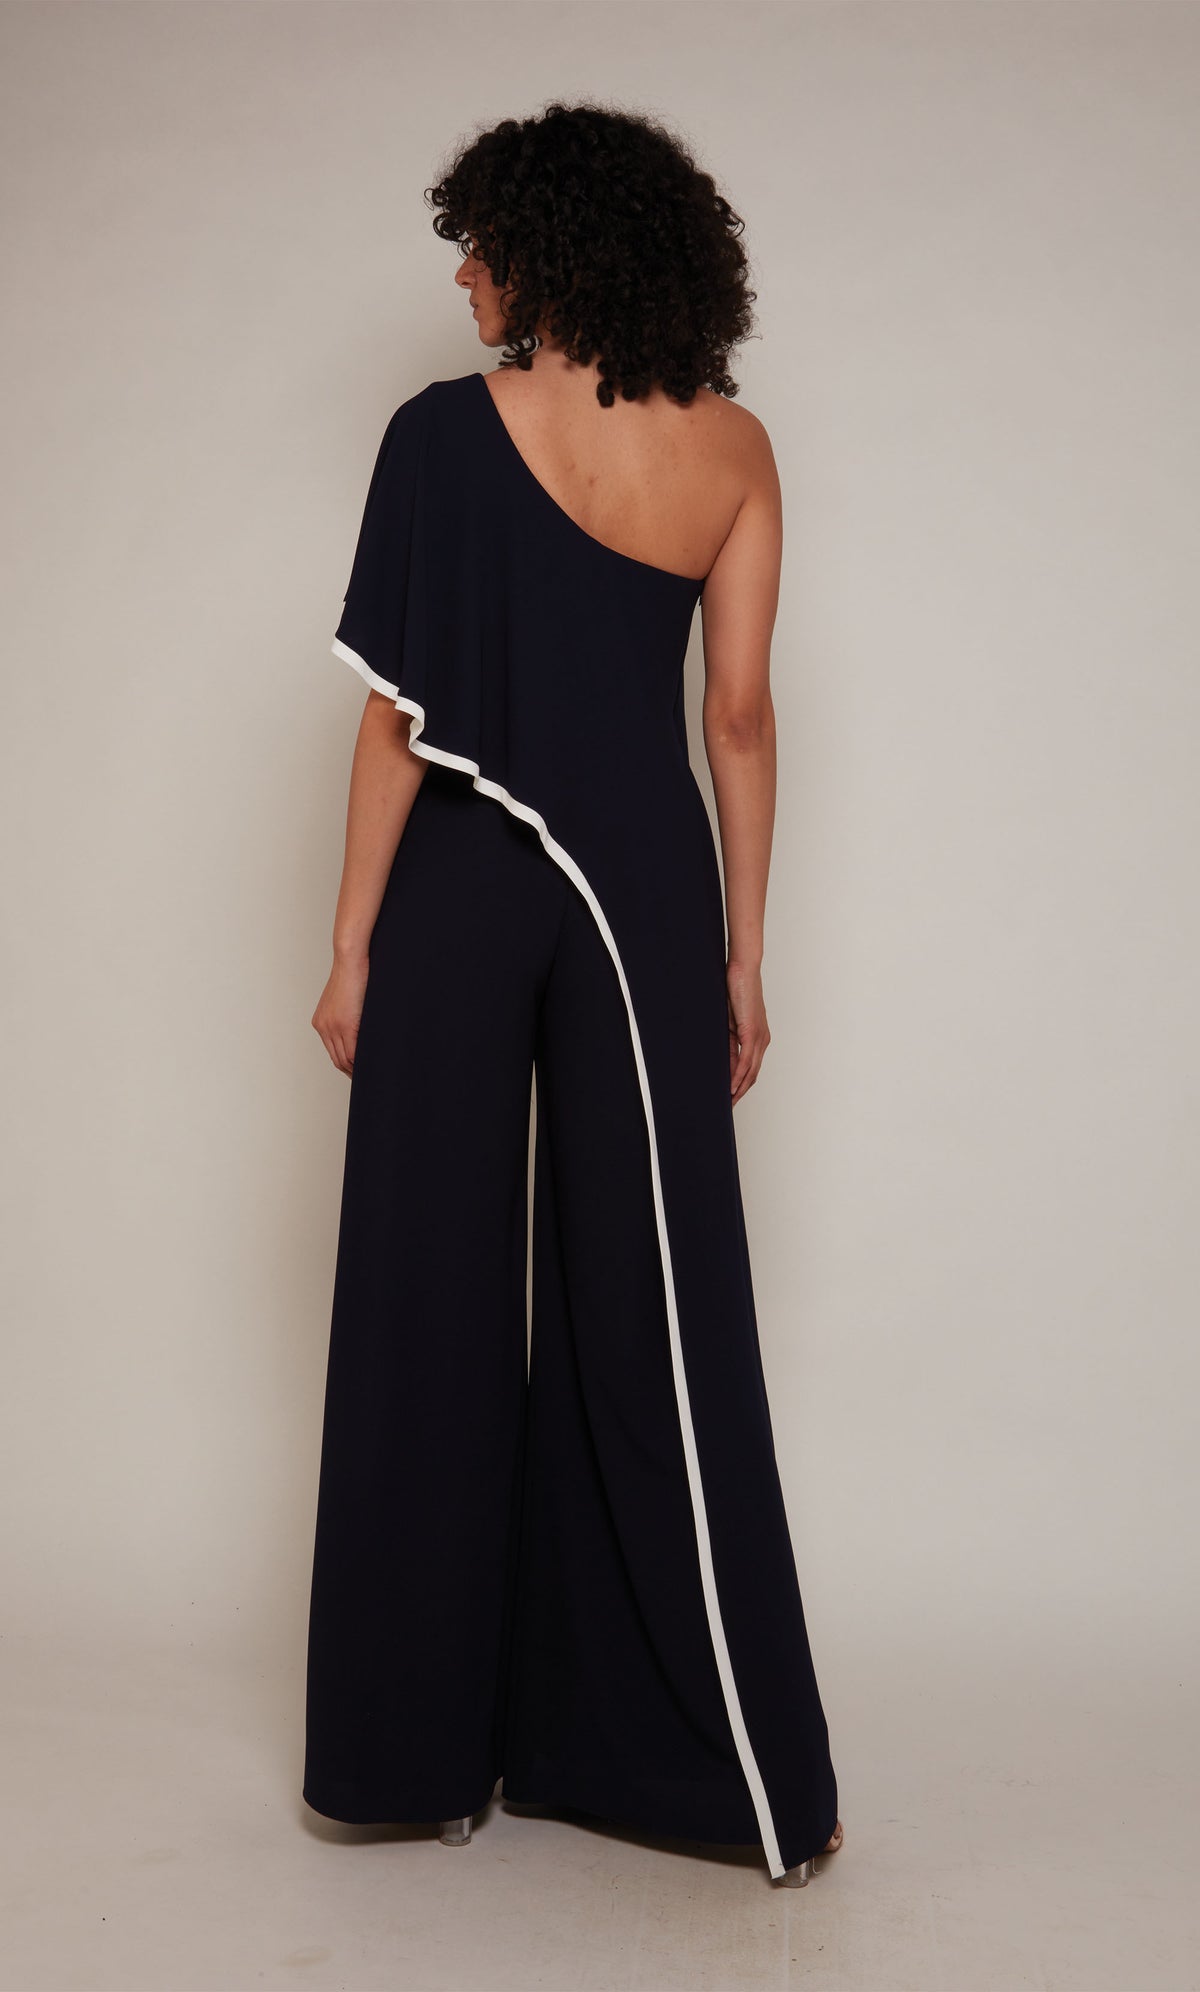 A wide leg, formal jumpsuit with a one shoulder neckline and draped bodice in navy blue with ivory trim.